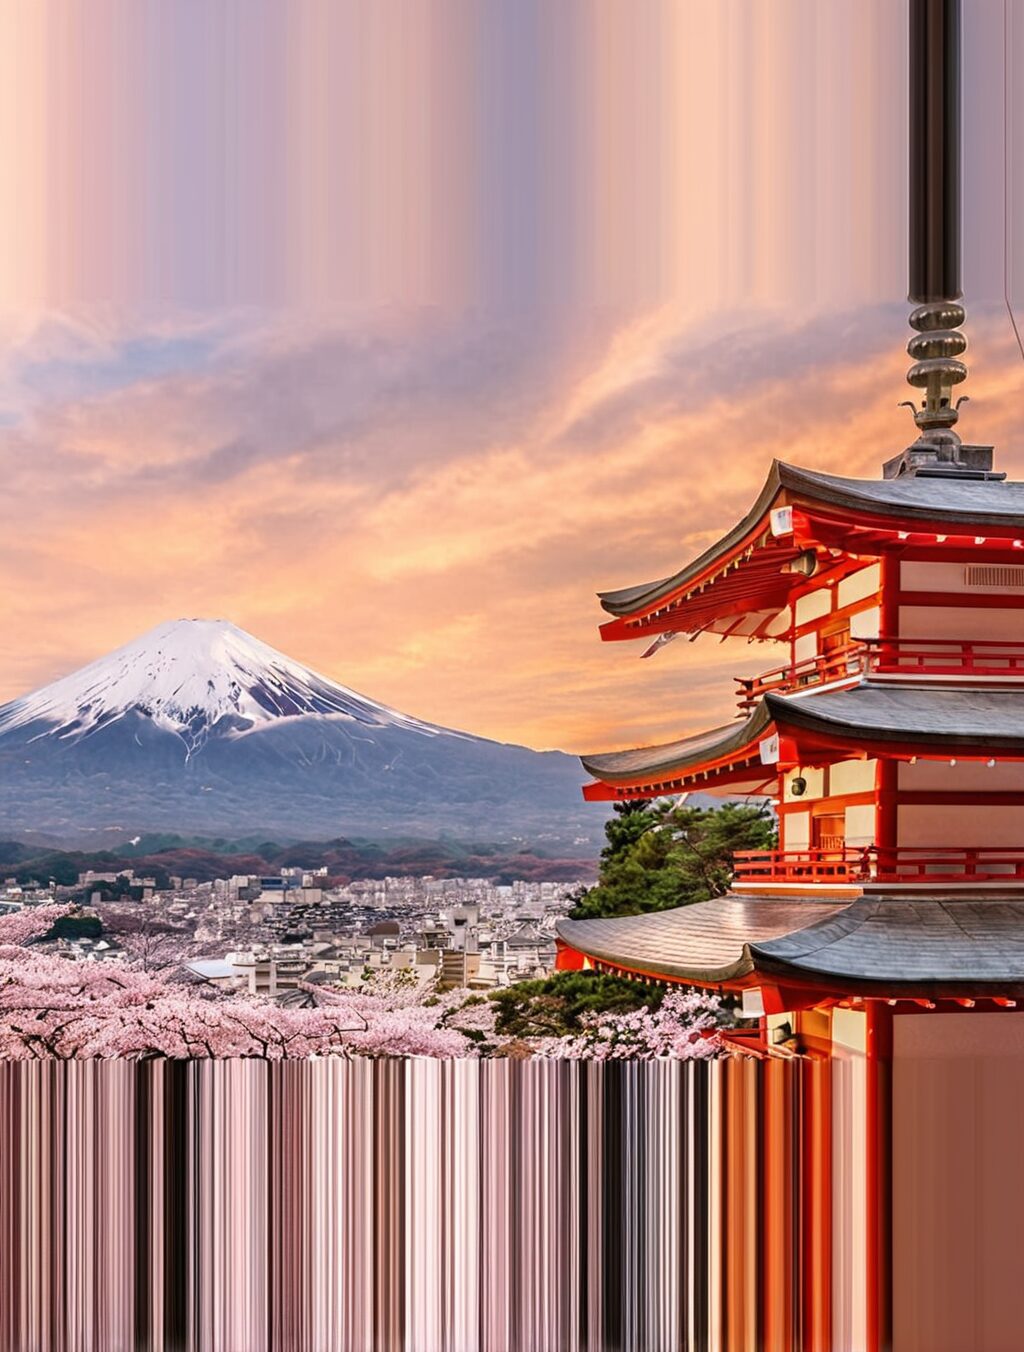 air and sea travel japan tours